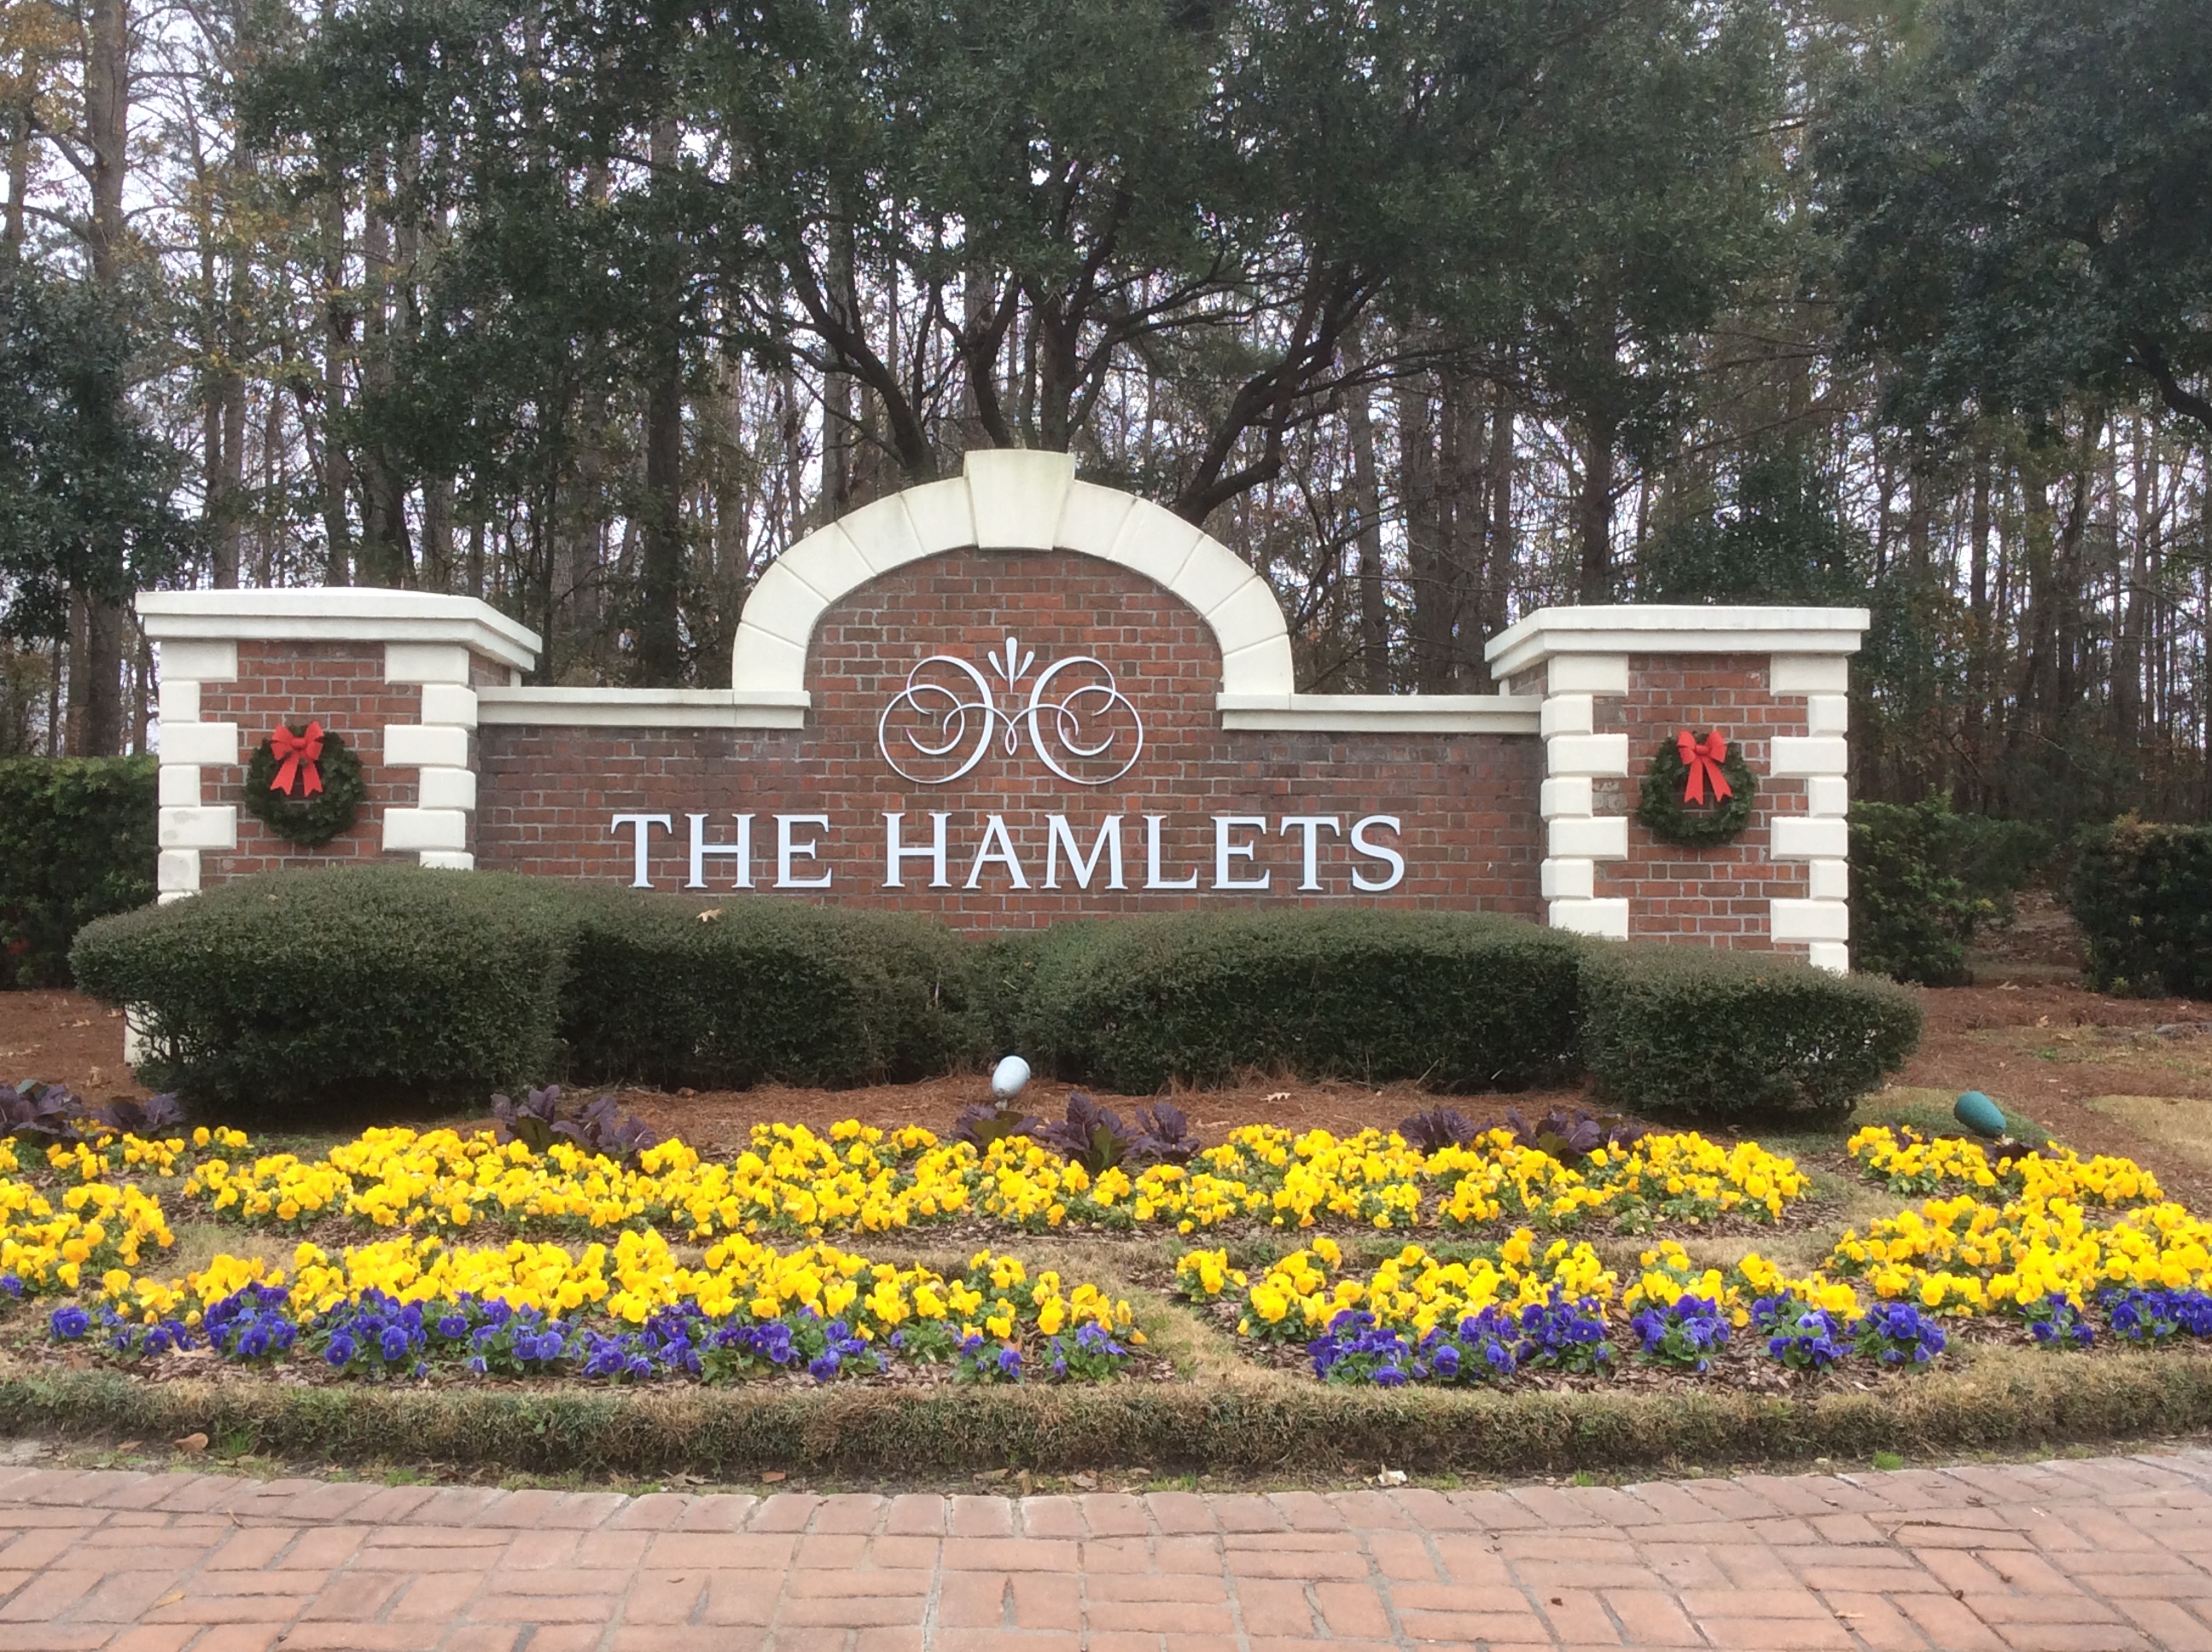 Entrance to The Hamlets